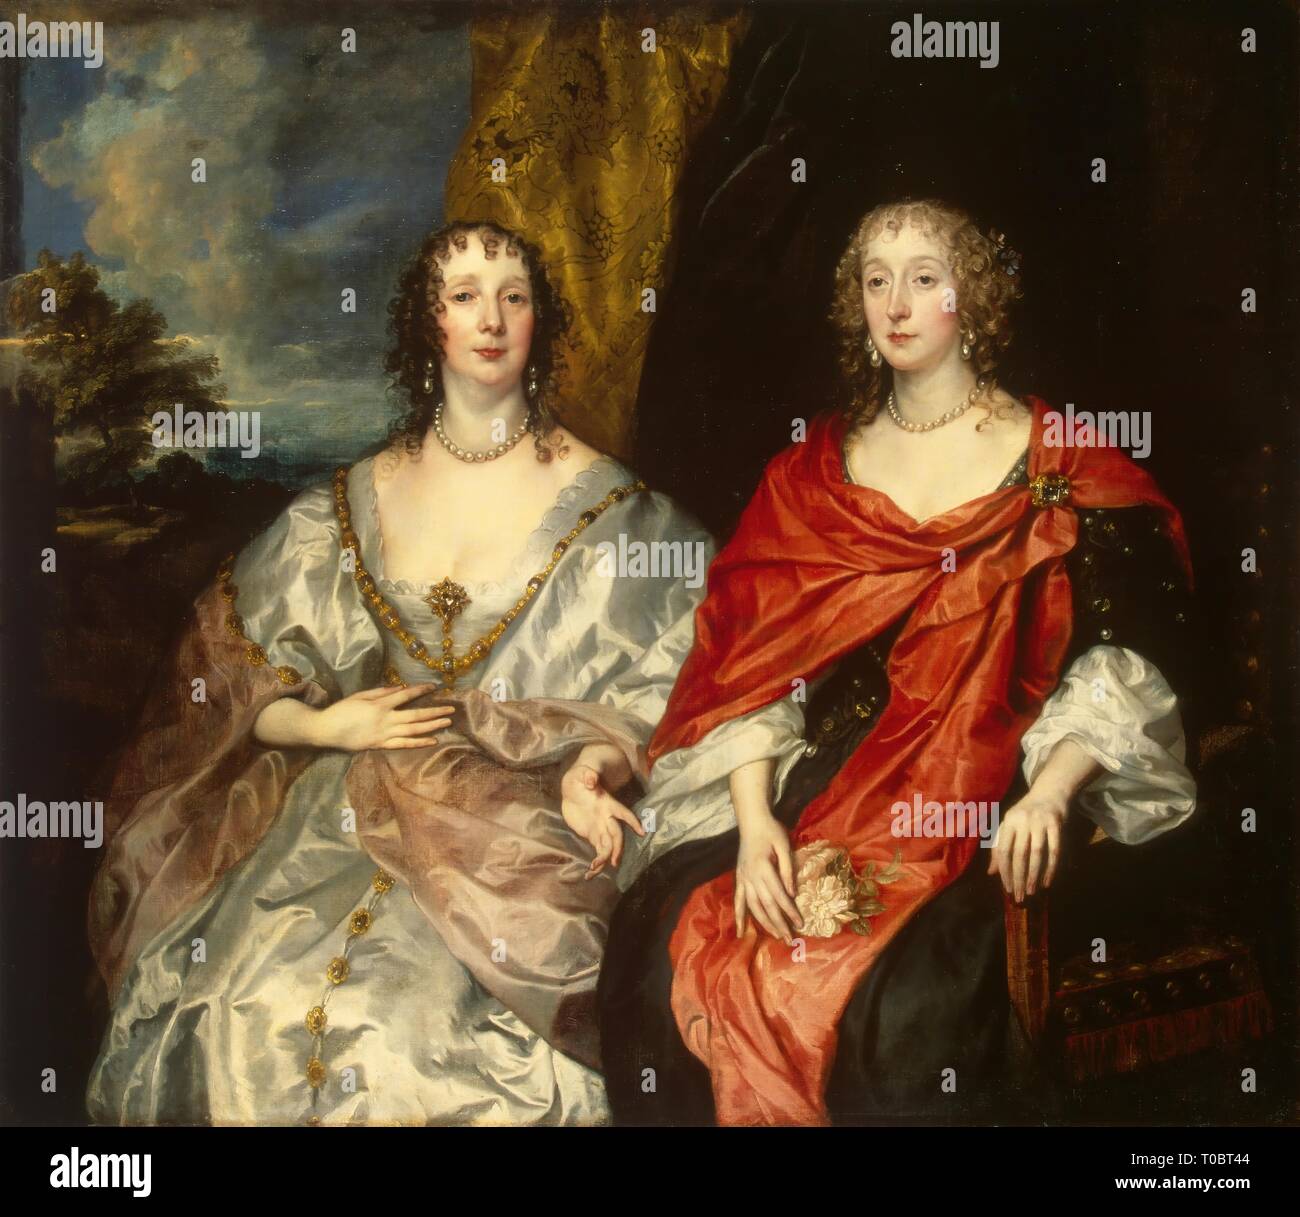 'Portrait of Ladies-in-Waiting to Queen Henrietta Maria: Anne Killigrew, Mrs George Kirke and Charlotte, Lady Strange (countess of Derby ? )'. Late 1630s. Dimensions: 131,5x150,6 cm. Museum: State Hermitage, St. Petersburg. Author: Anthony Van Dyck. Stock Photo